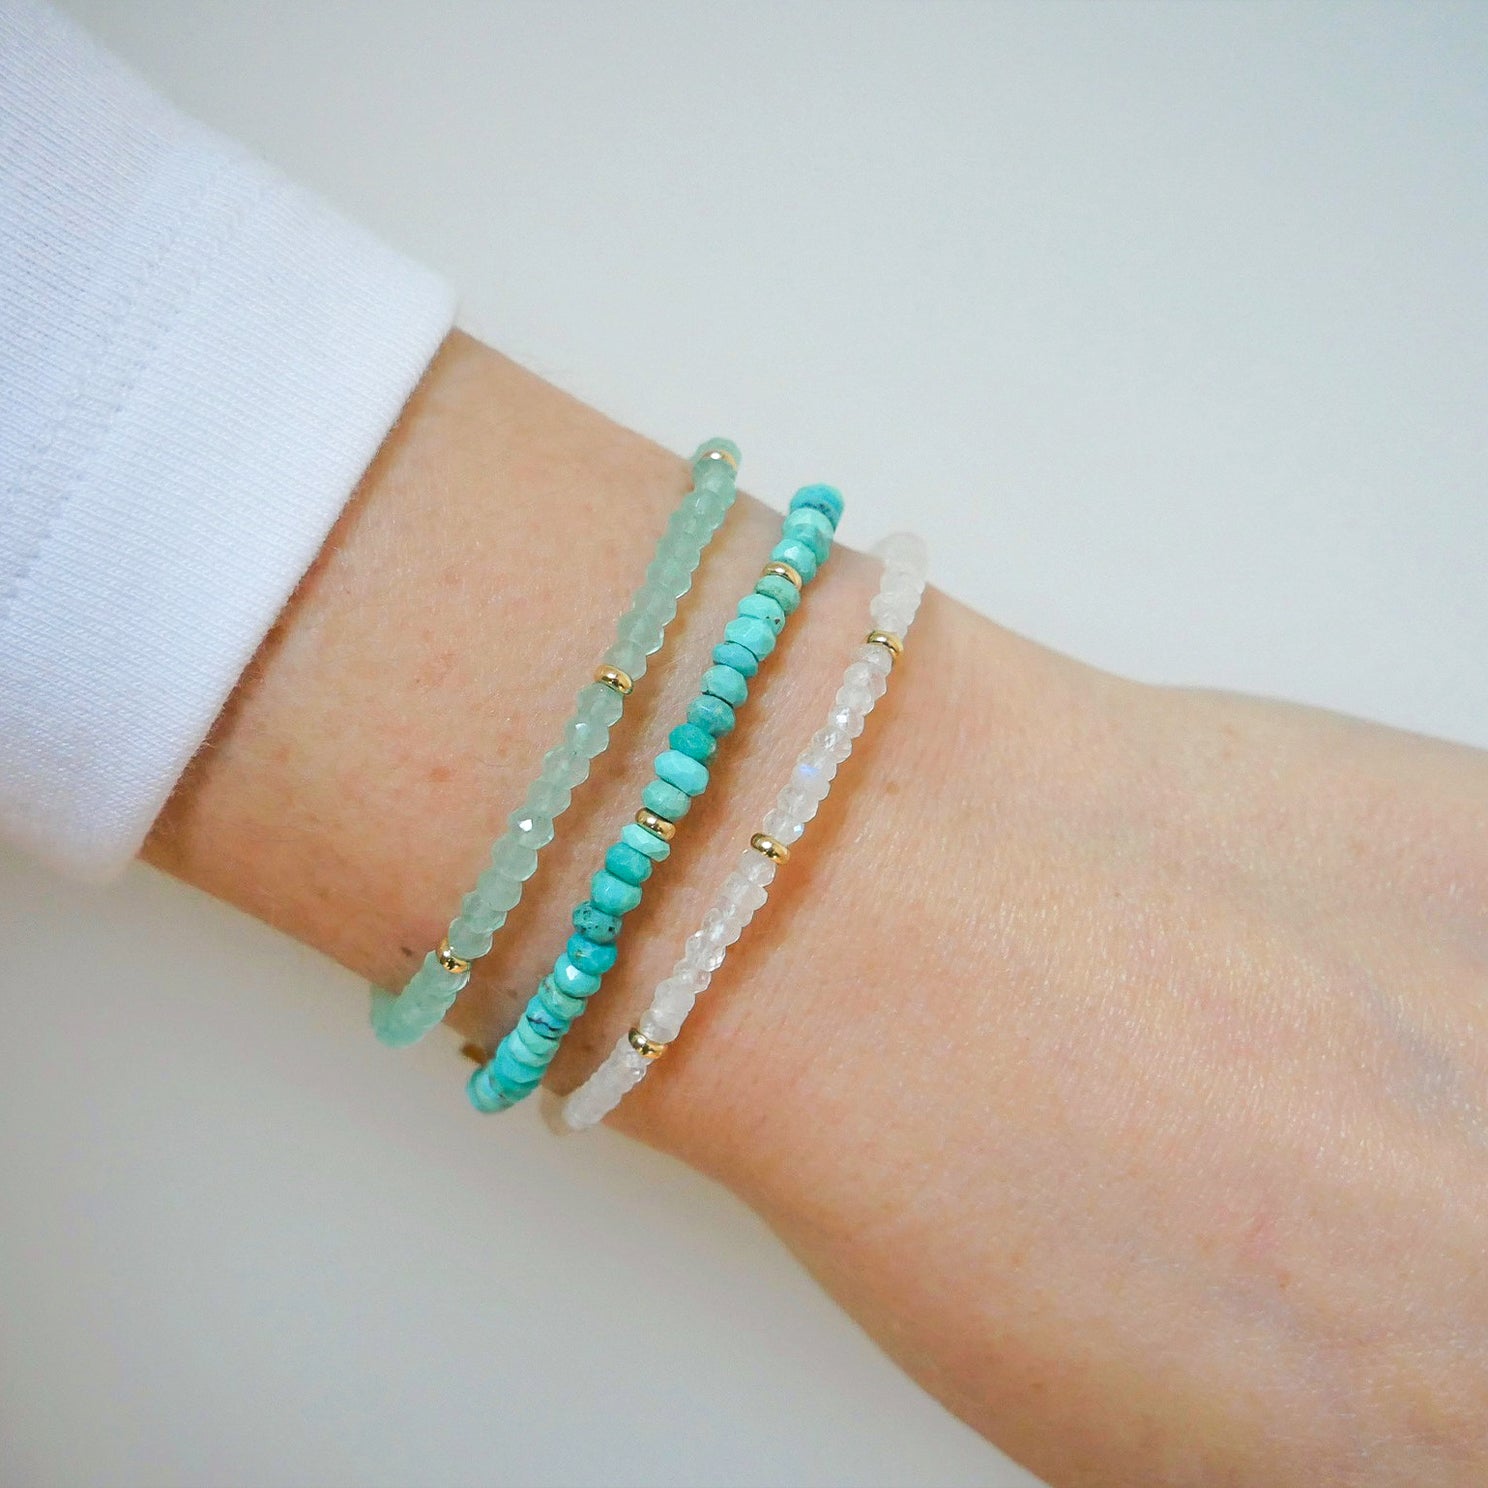 Birthstone Bead Bracelet In Moon Stone styled next to turquoise and labradorite bracelets styled on wrist with white sleeve